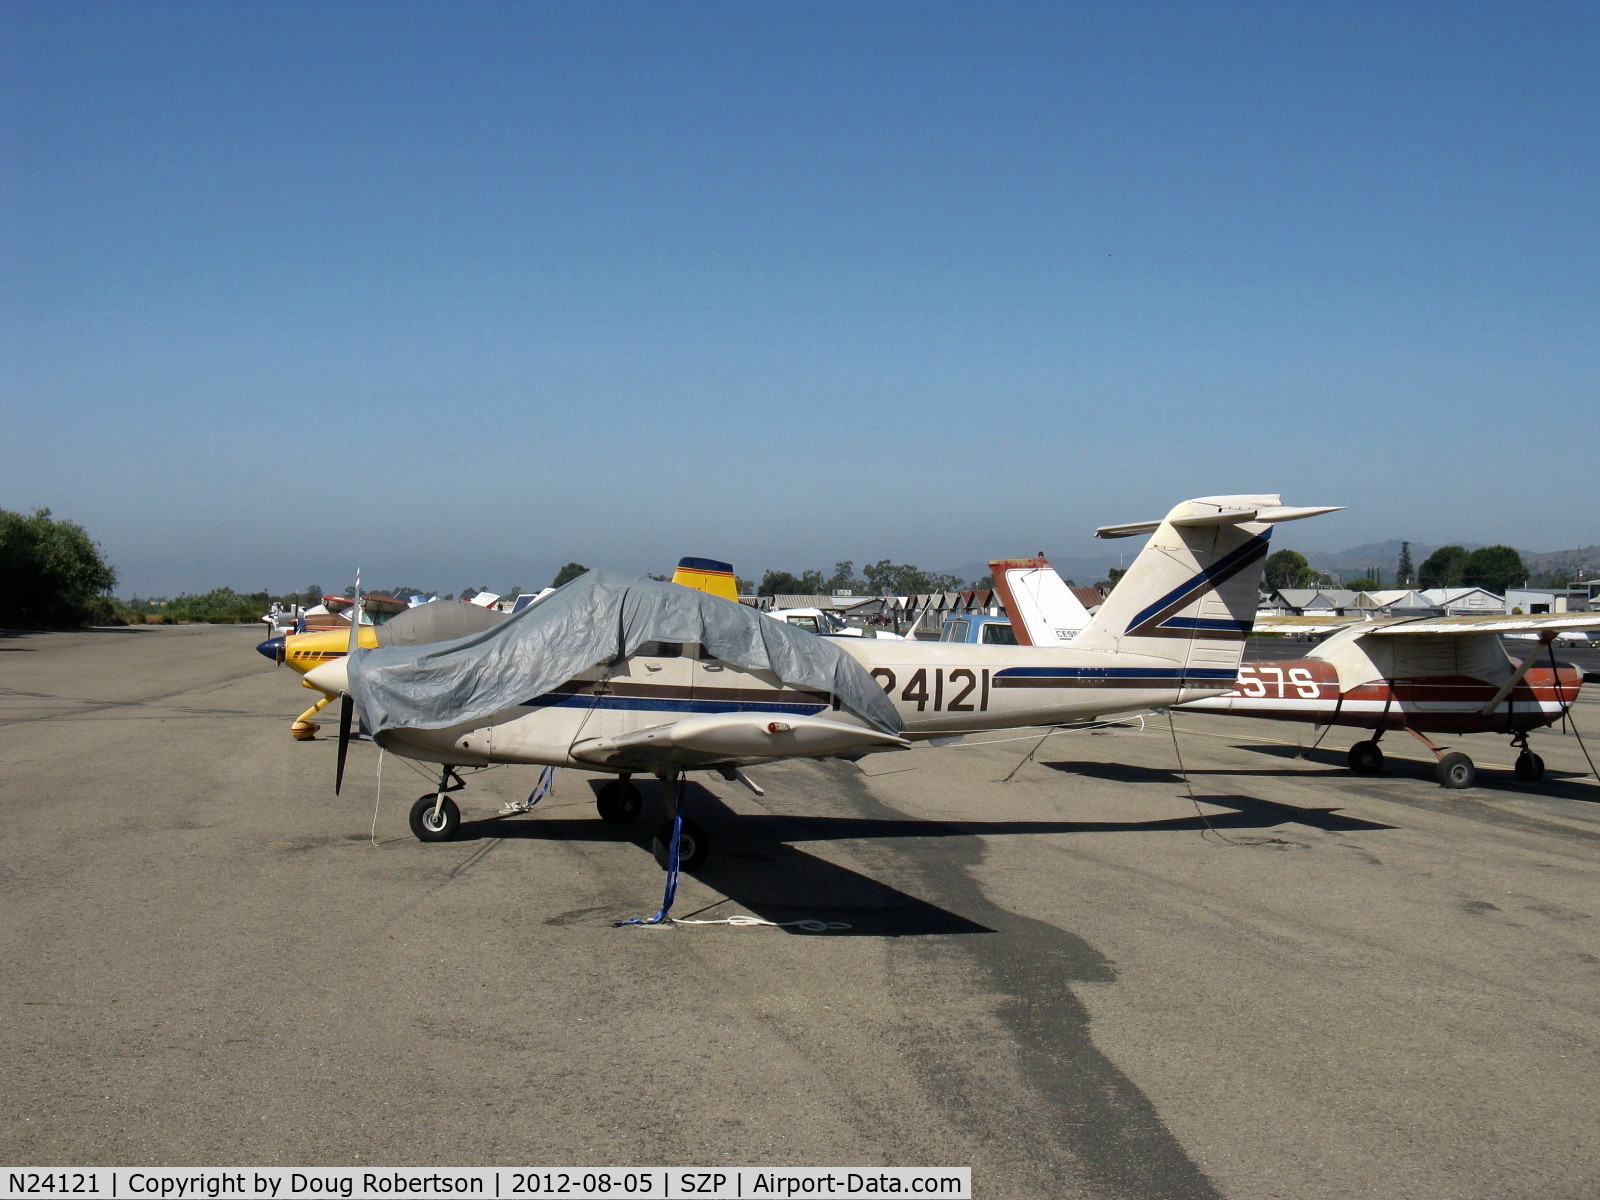 N24121, 1979 Piper PA-38-112 Tomahawk C/N 38-79A1087, 1979 Piper PA-38-112 TOMAHAWK, Lycoming O-235-L2C 112 Hp, T tail trainer